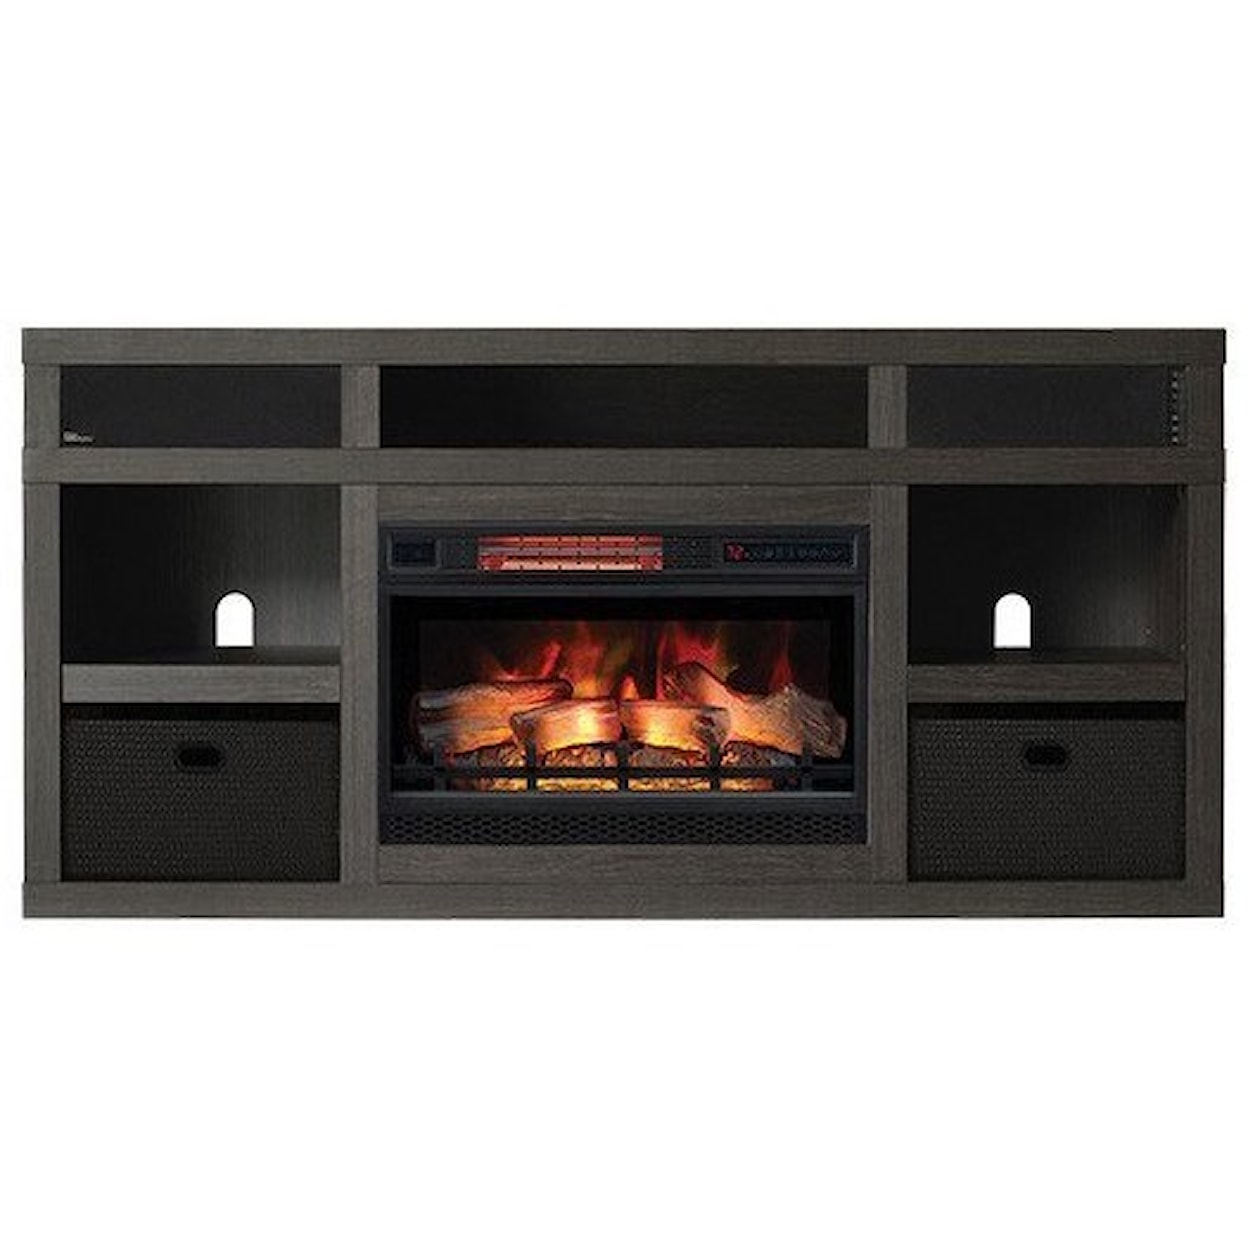 ClassicFlame Greatlin Media Mantel Fireplace with Speakers